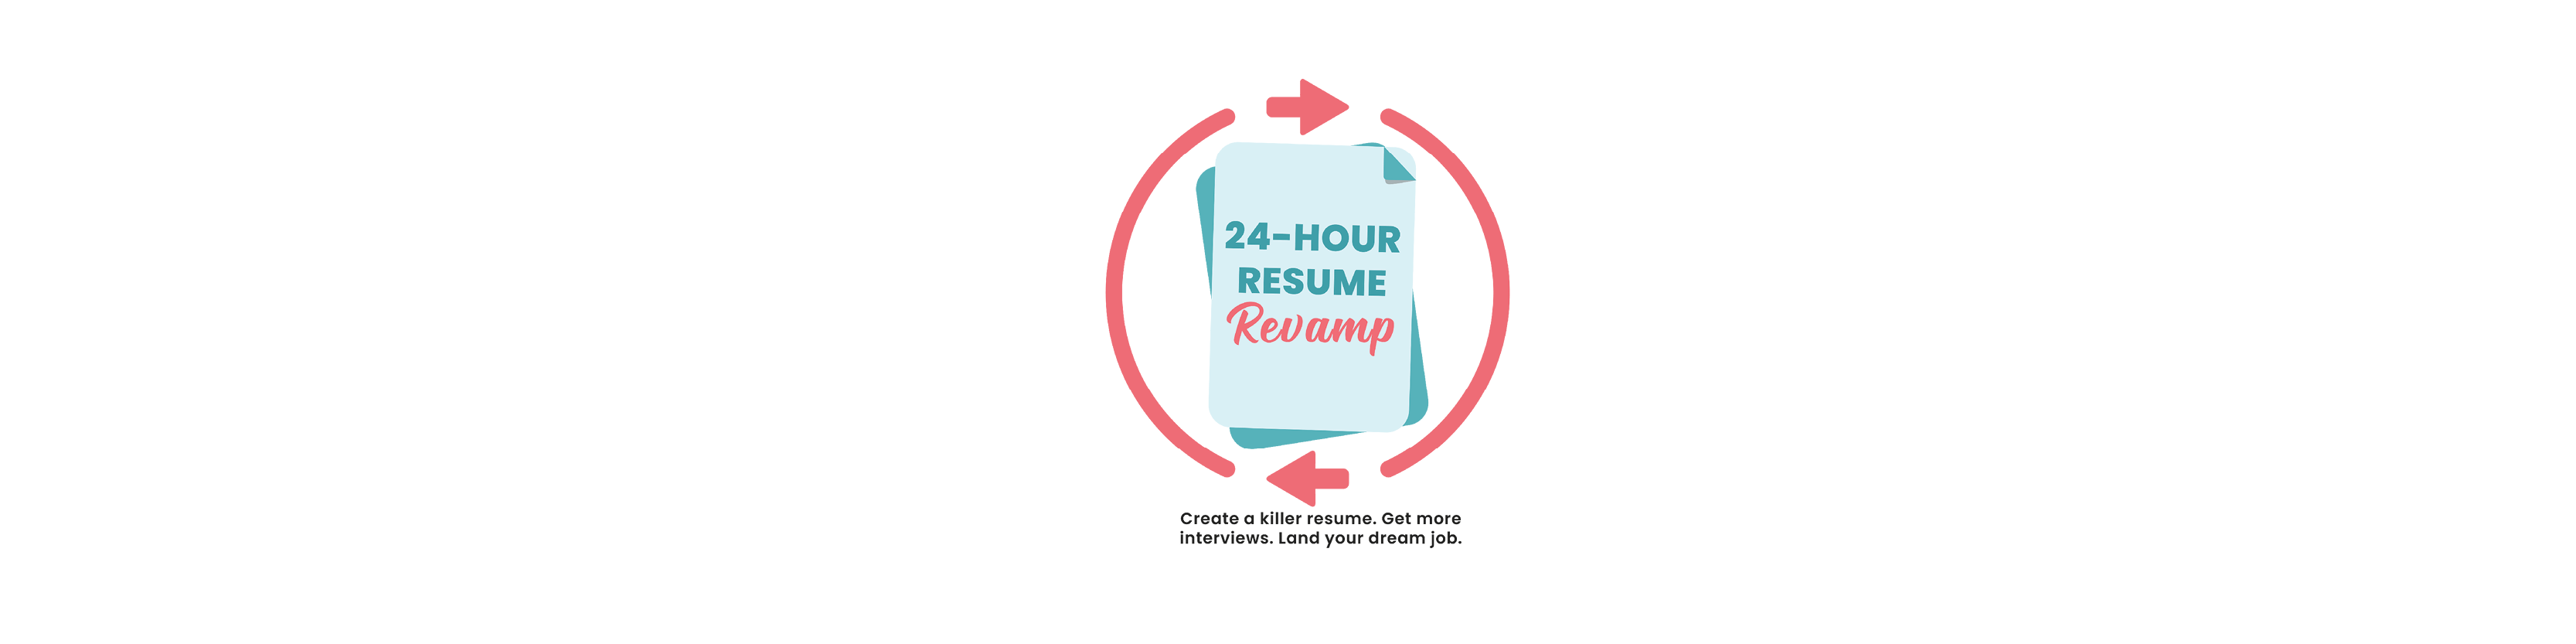 24-Hour resume revamp course